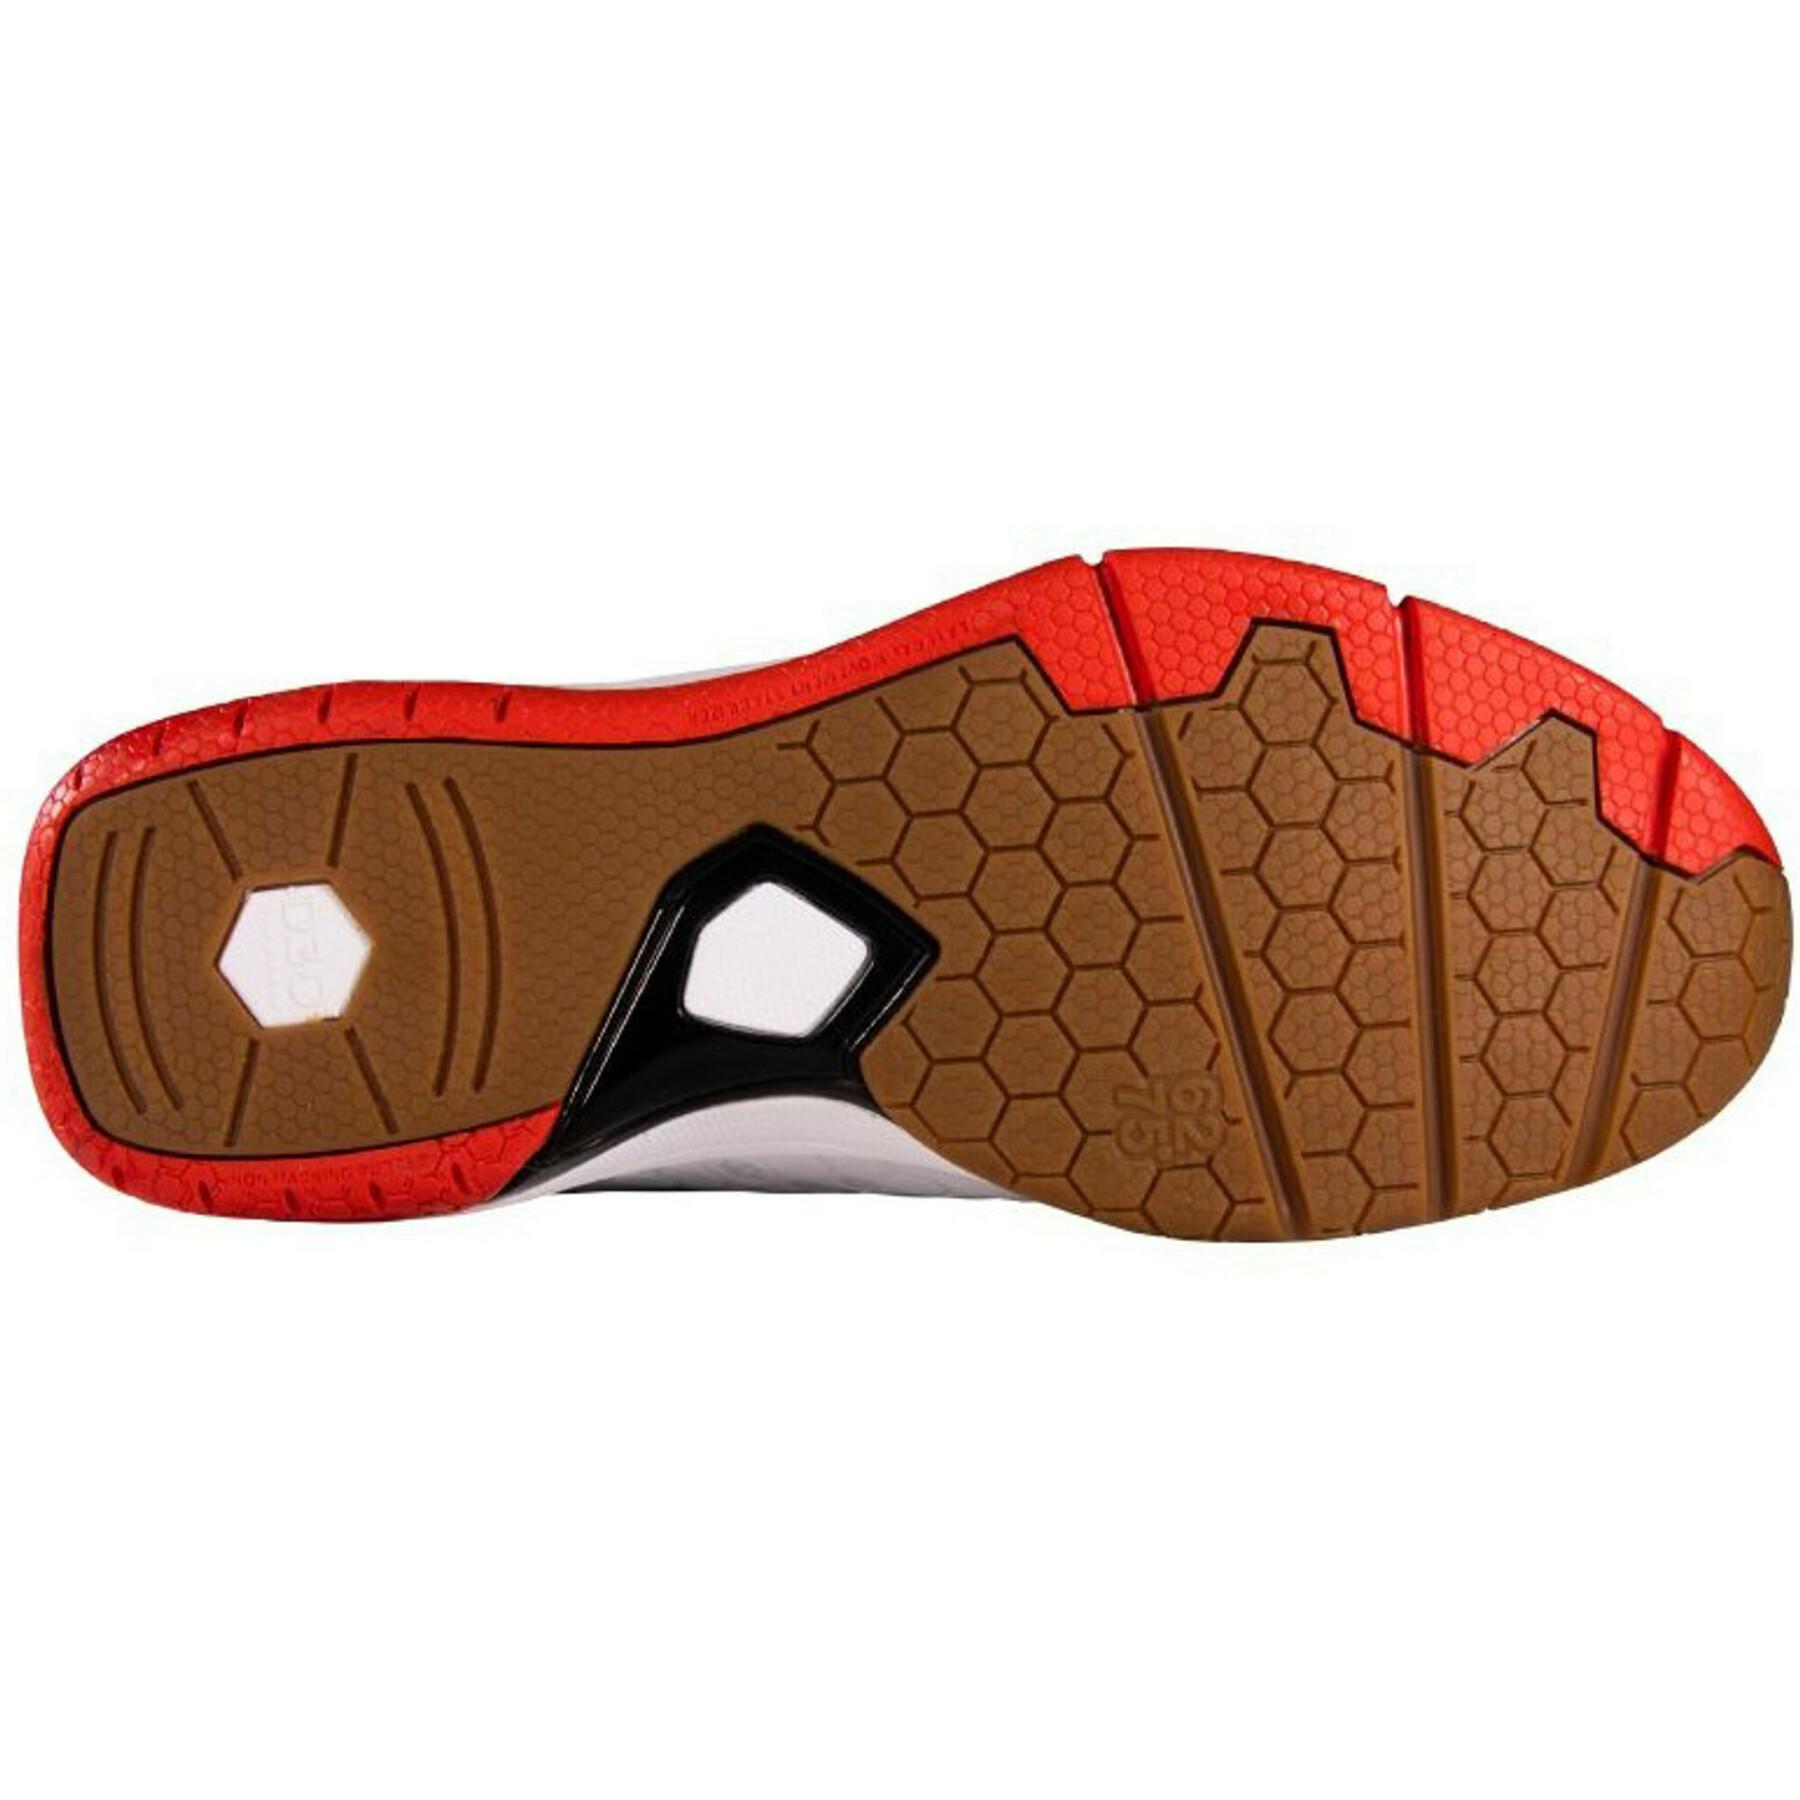 Indoor shoes Salming Eagle